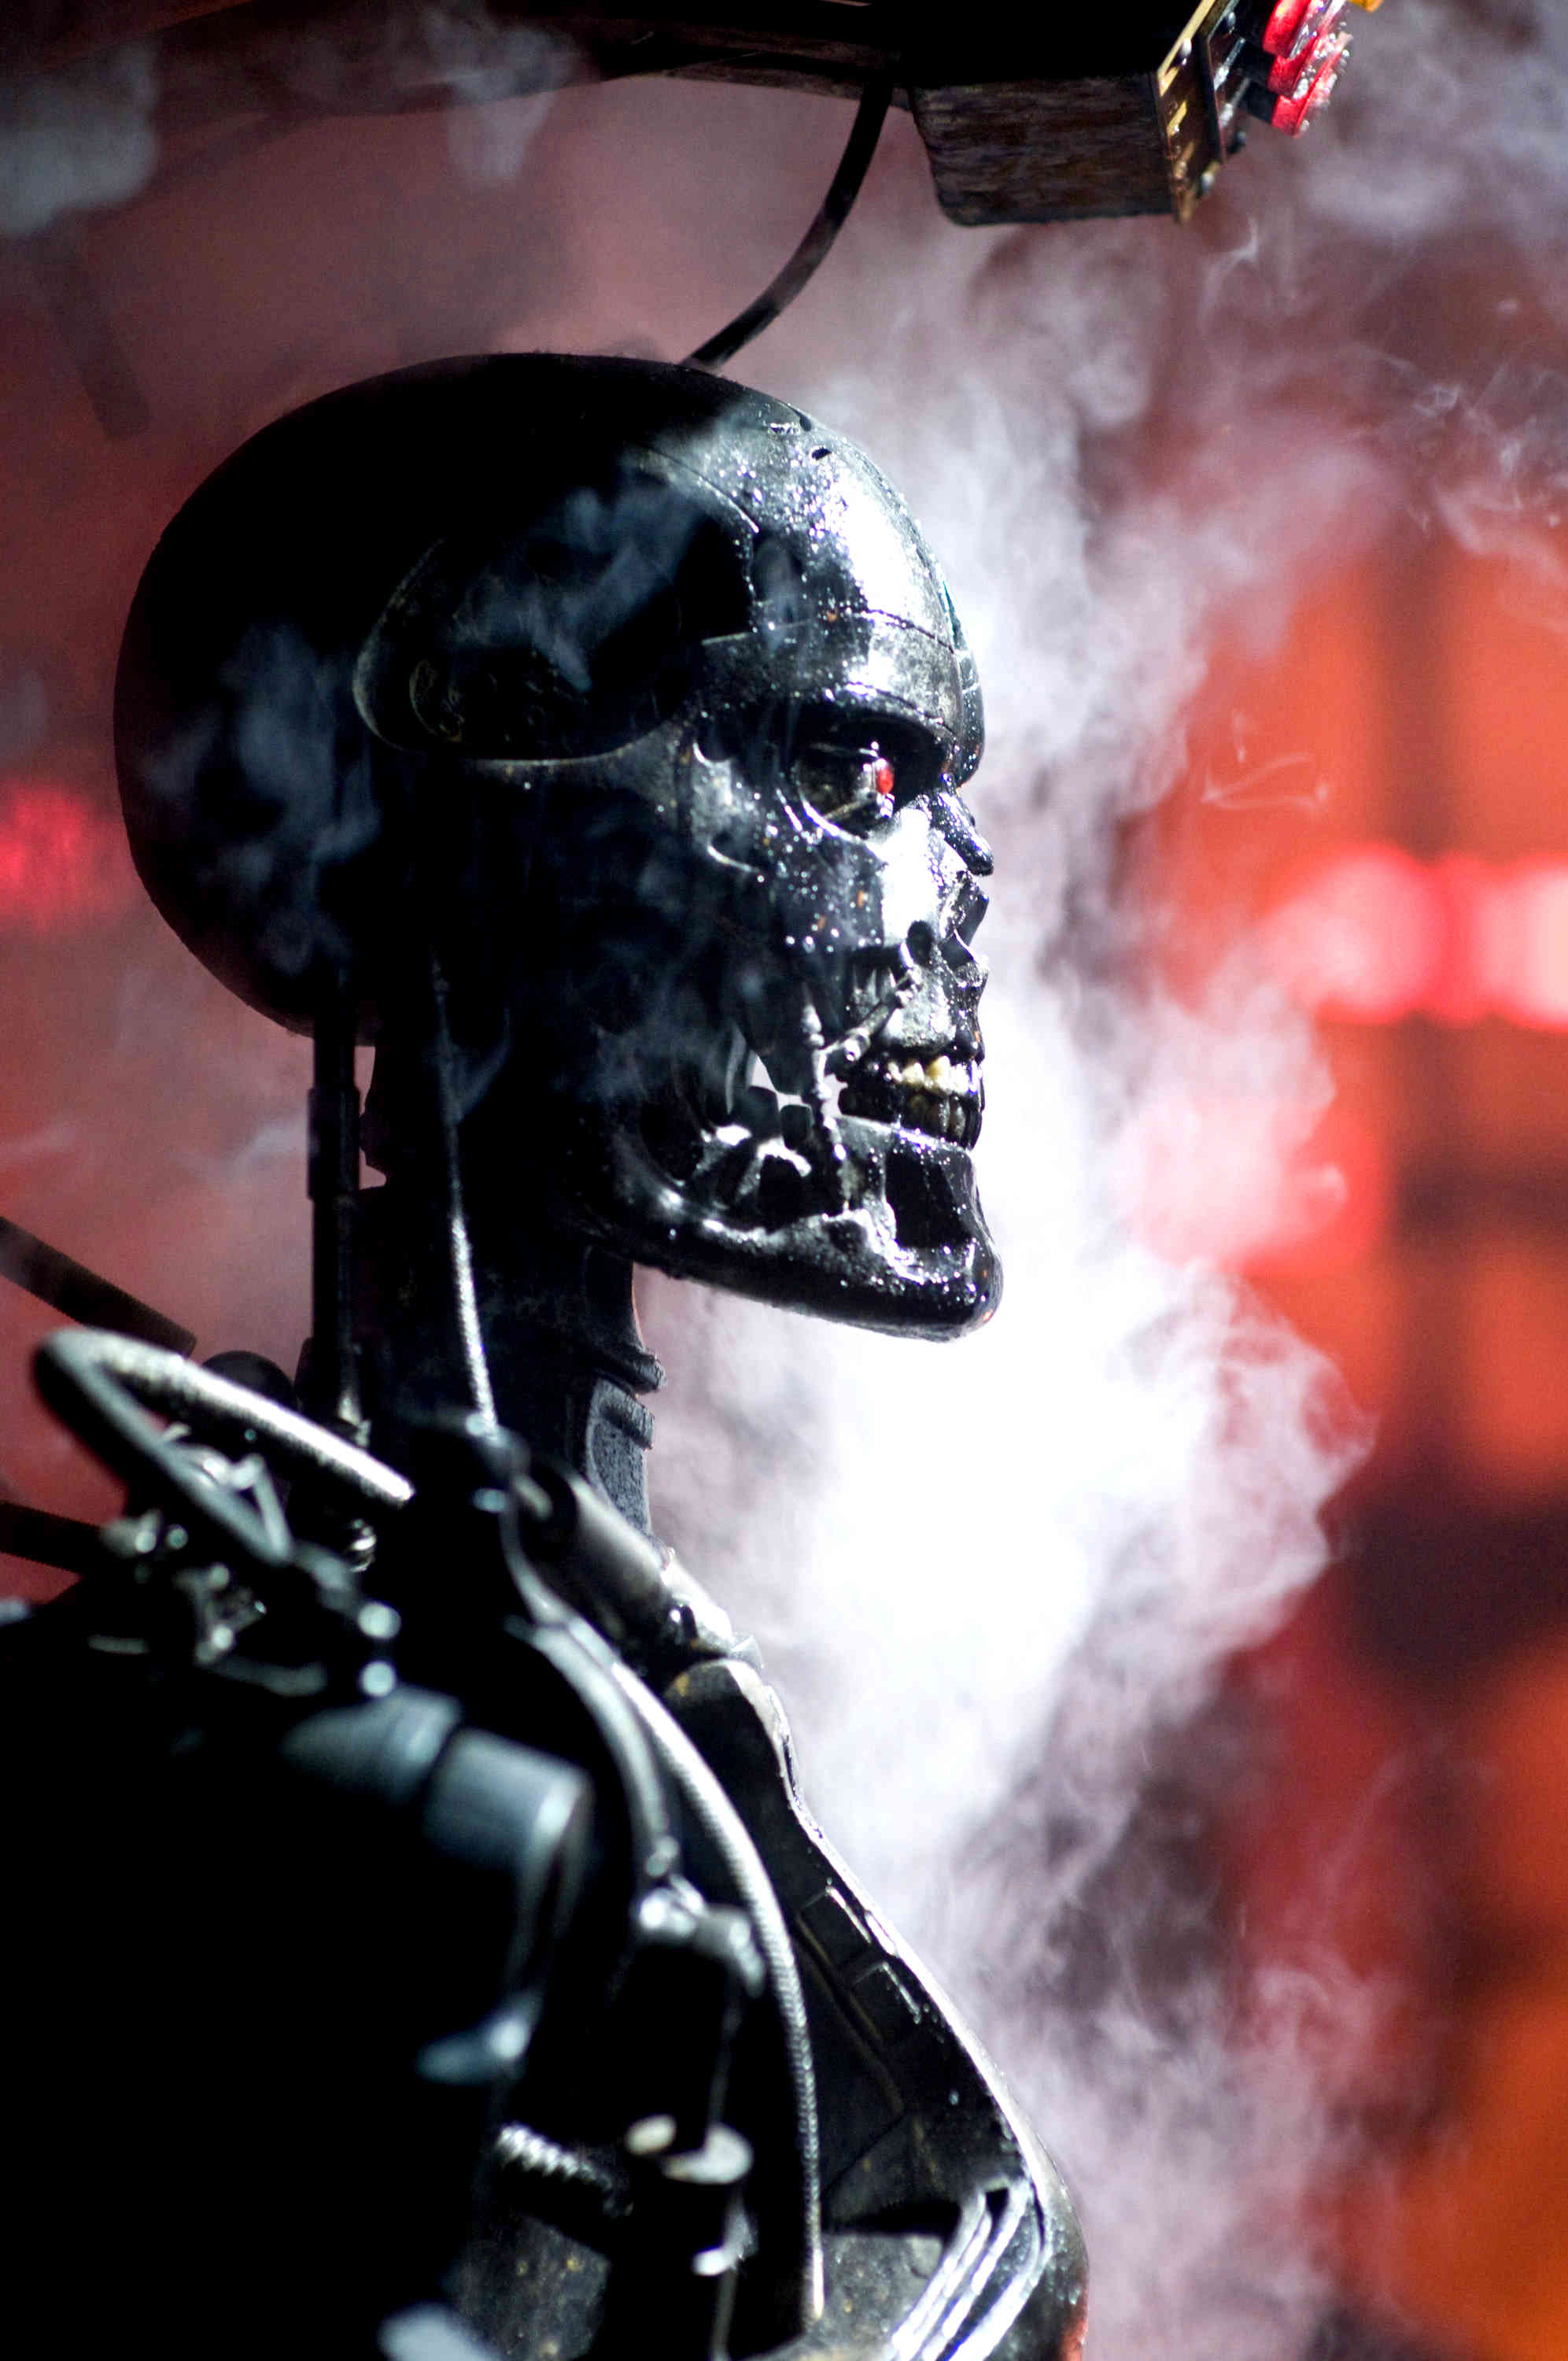 A scene from Warner Bros. Pictures' Terminator Salvation (2009). Photo credit by Richard Foreman.